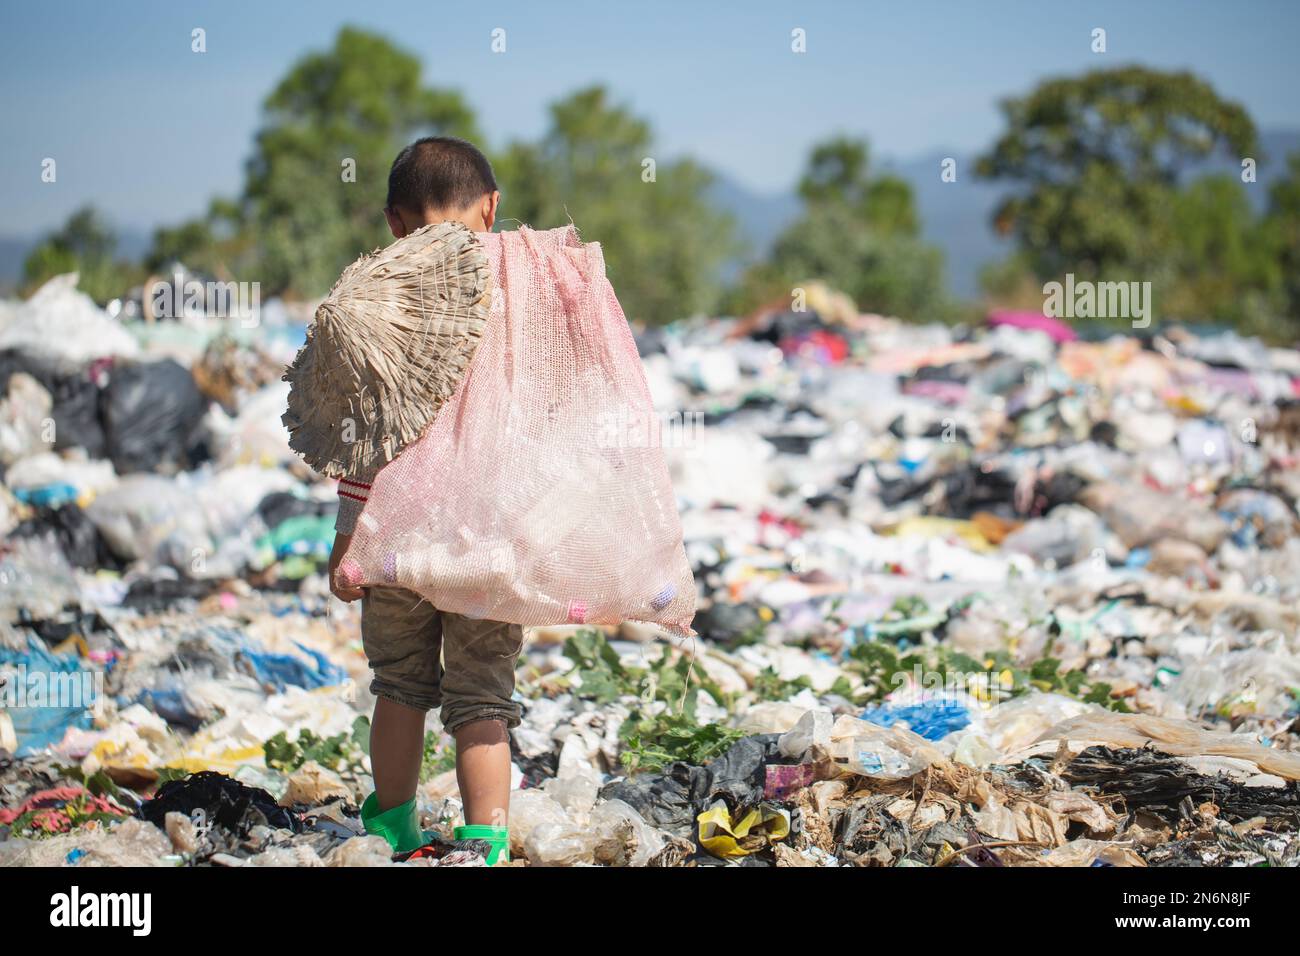 Poor boy collecting garbage in his sack to earn his livelihood, The concept  of poor children and poverty Stock Photo